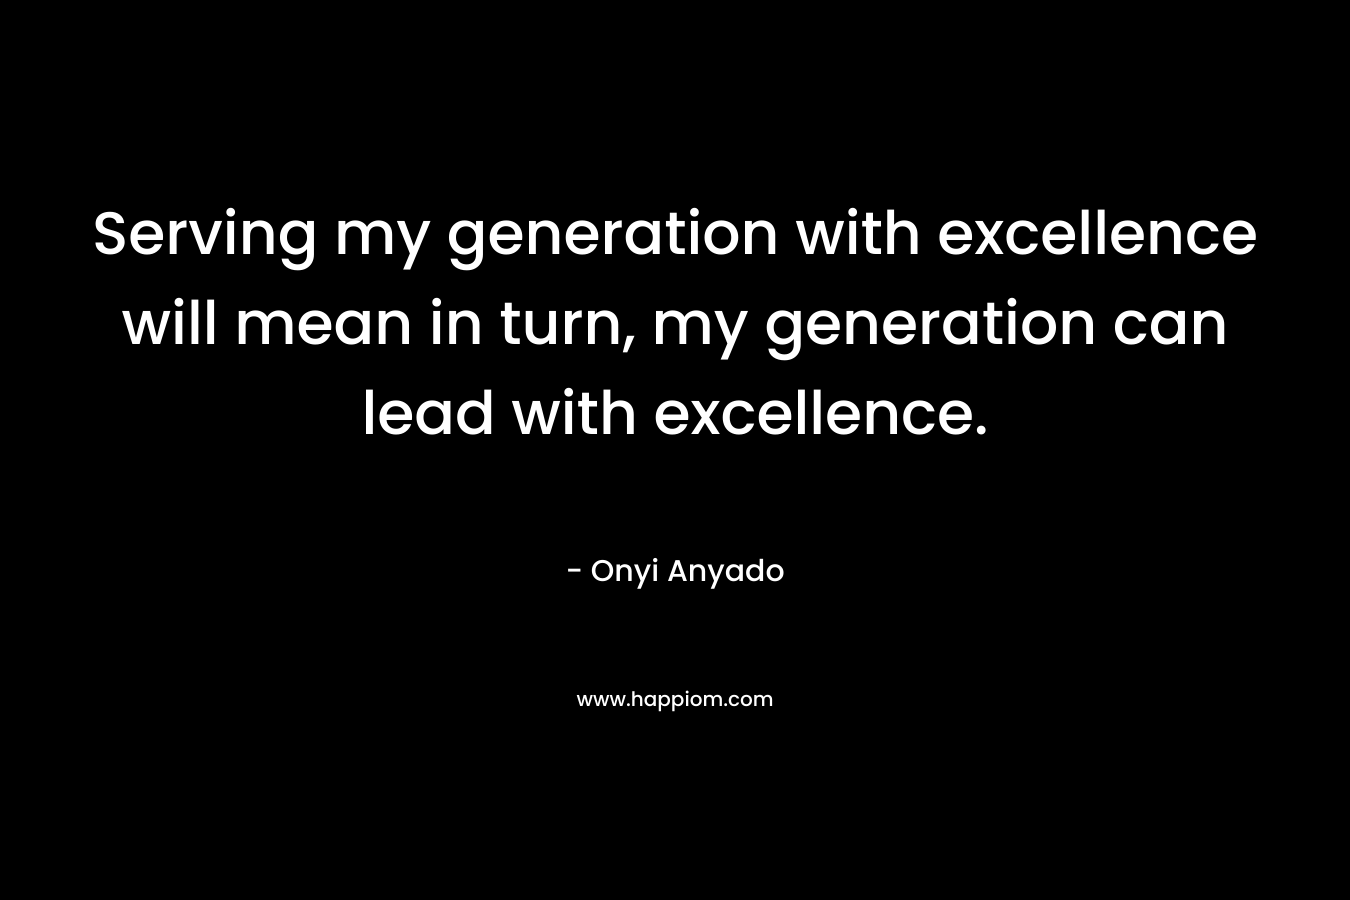 Serving my generation with excellence will mean in turn, my generation can lead with excellence. – Onyi Anyado